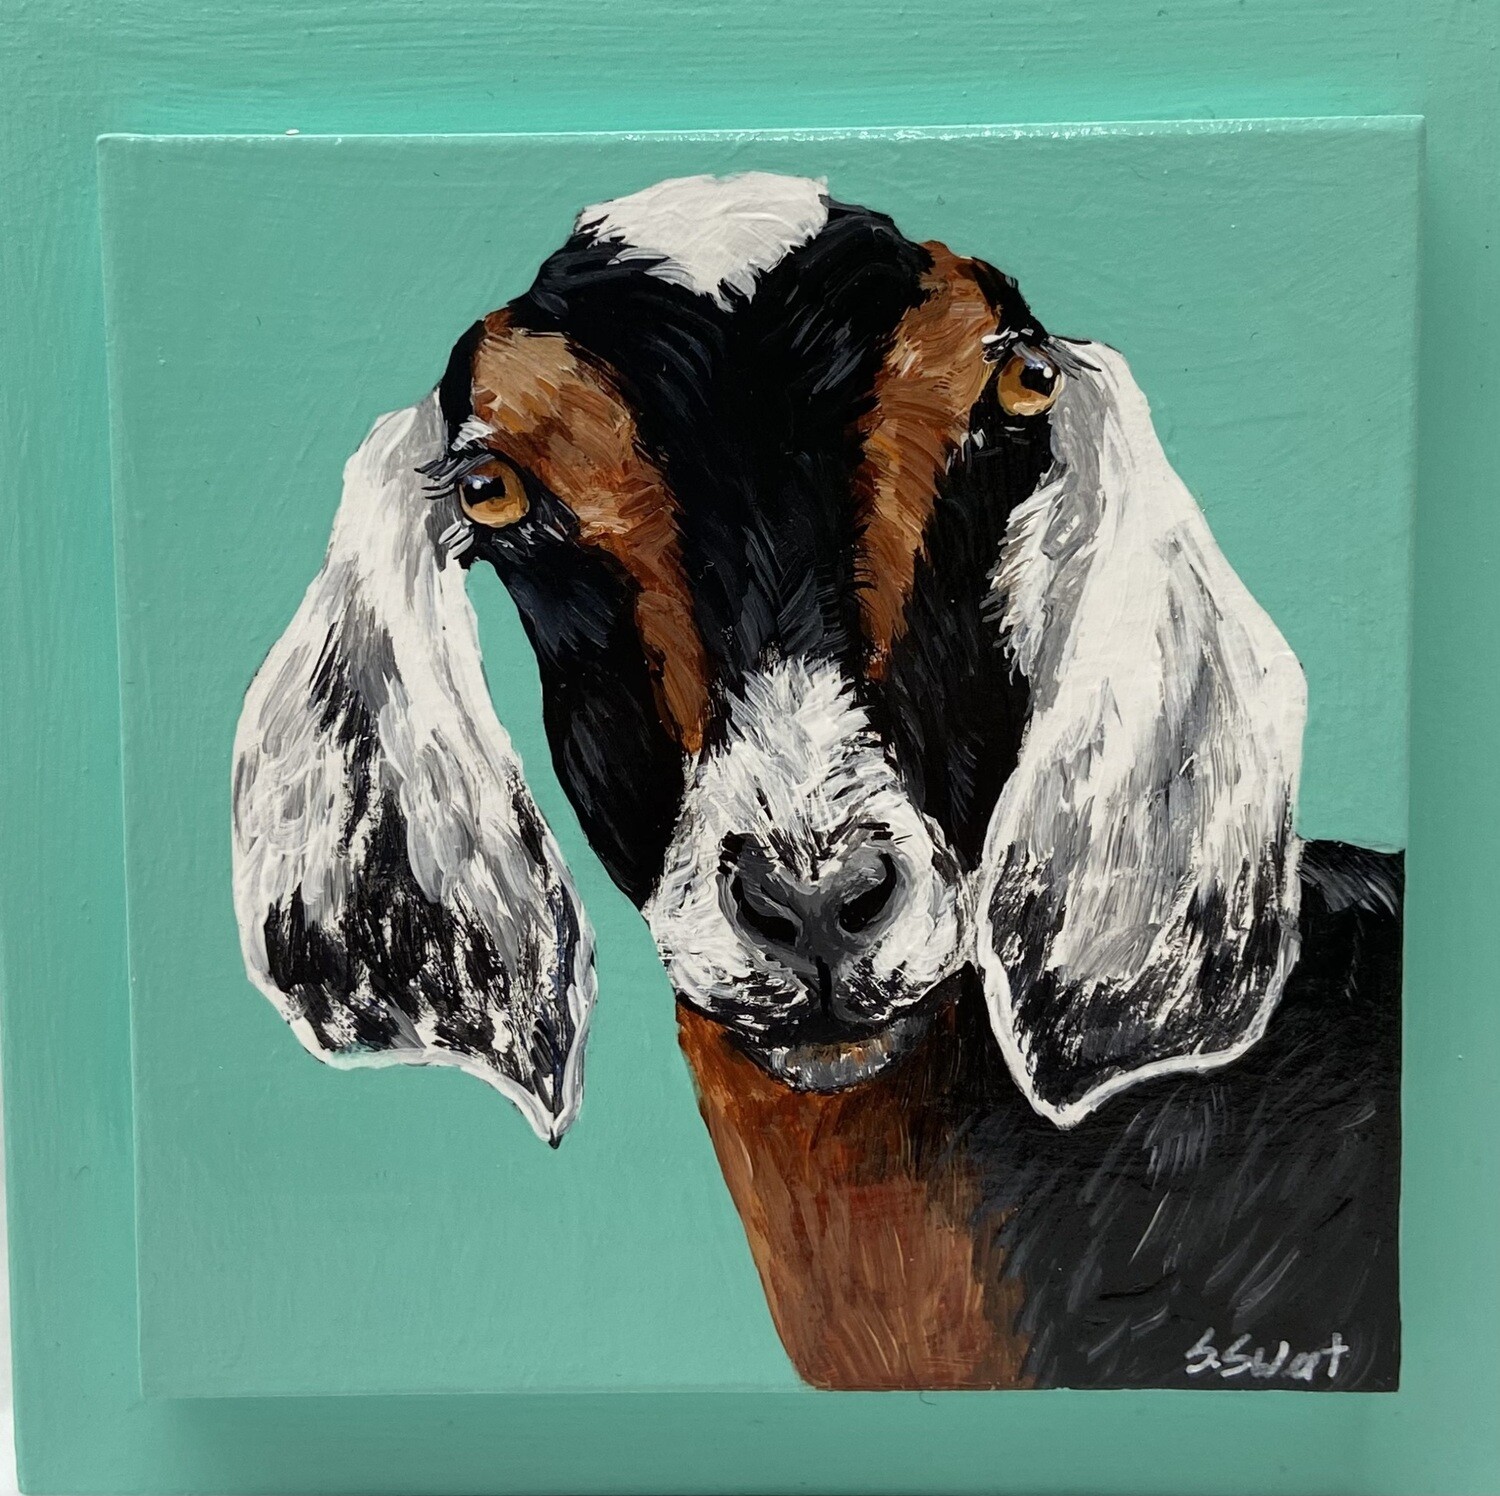 Malcolm the Goat in Turquoise